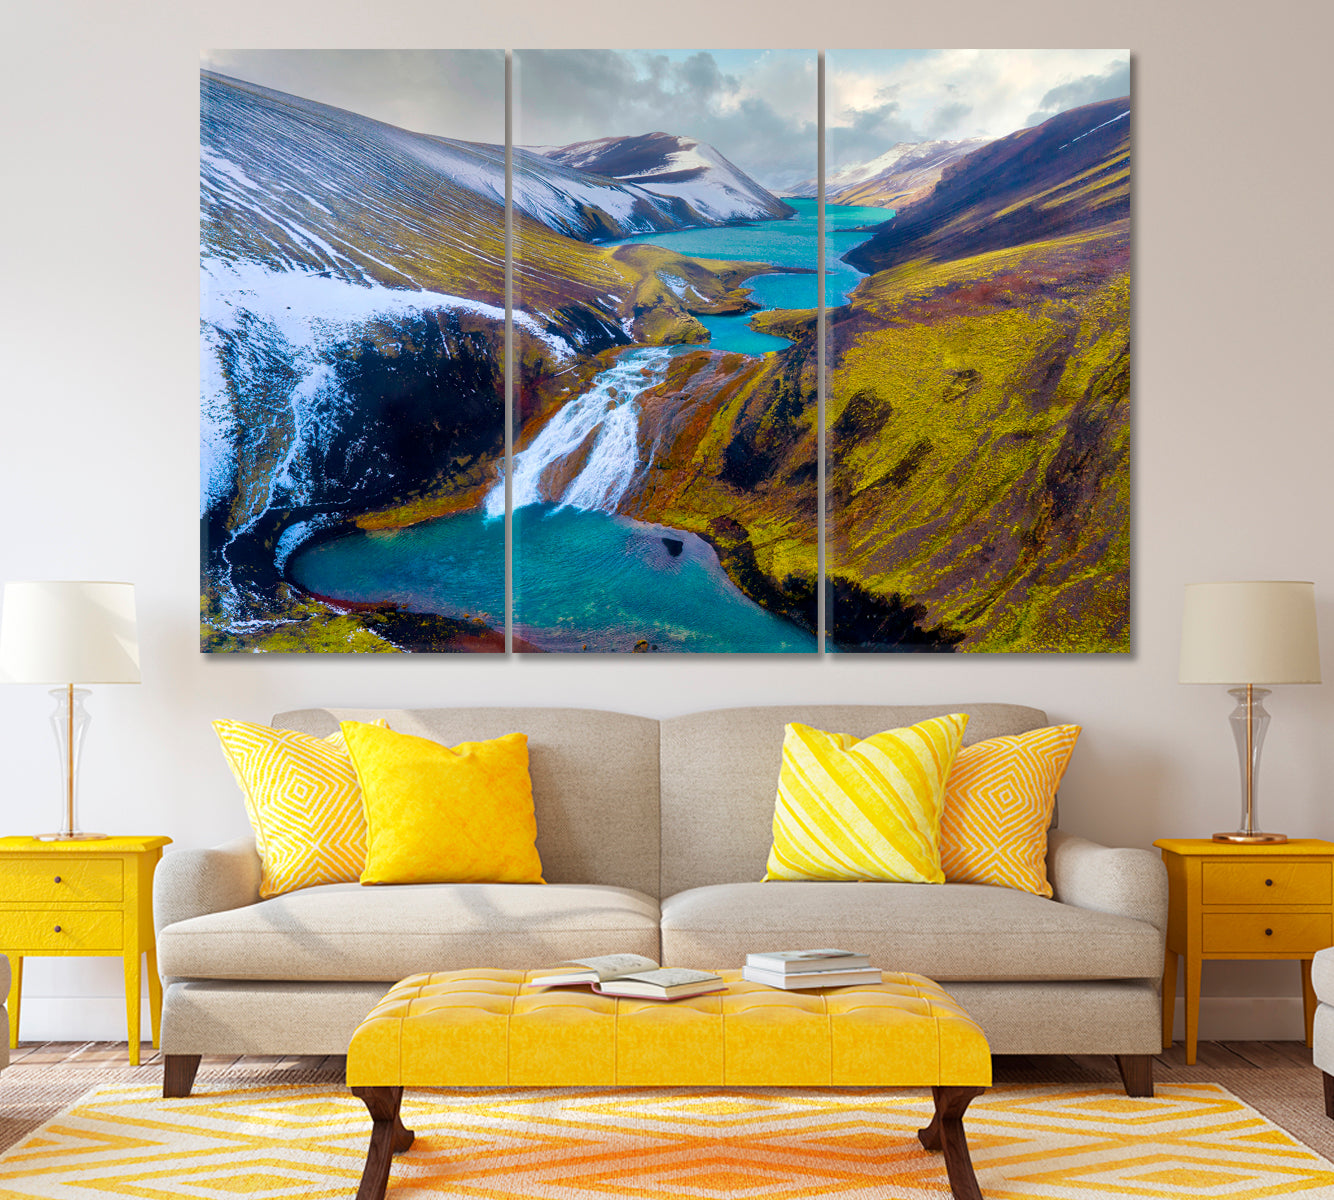 Raudibotn Crater Iceland Canvas Print ArtLexy 3 Panels 36"x24" inches 